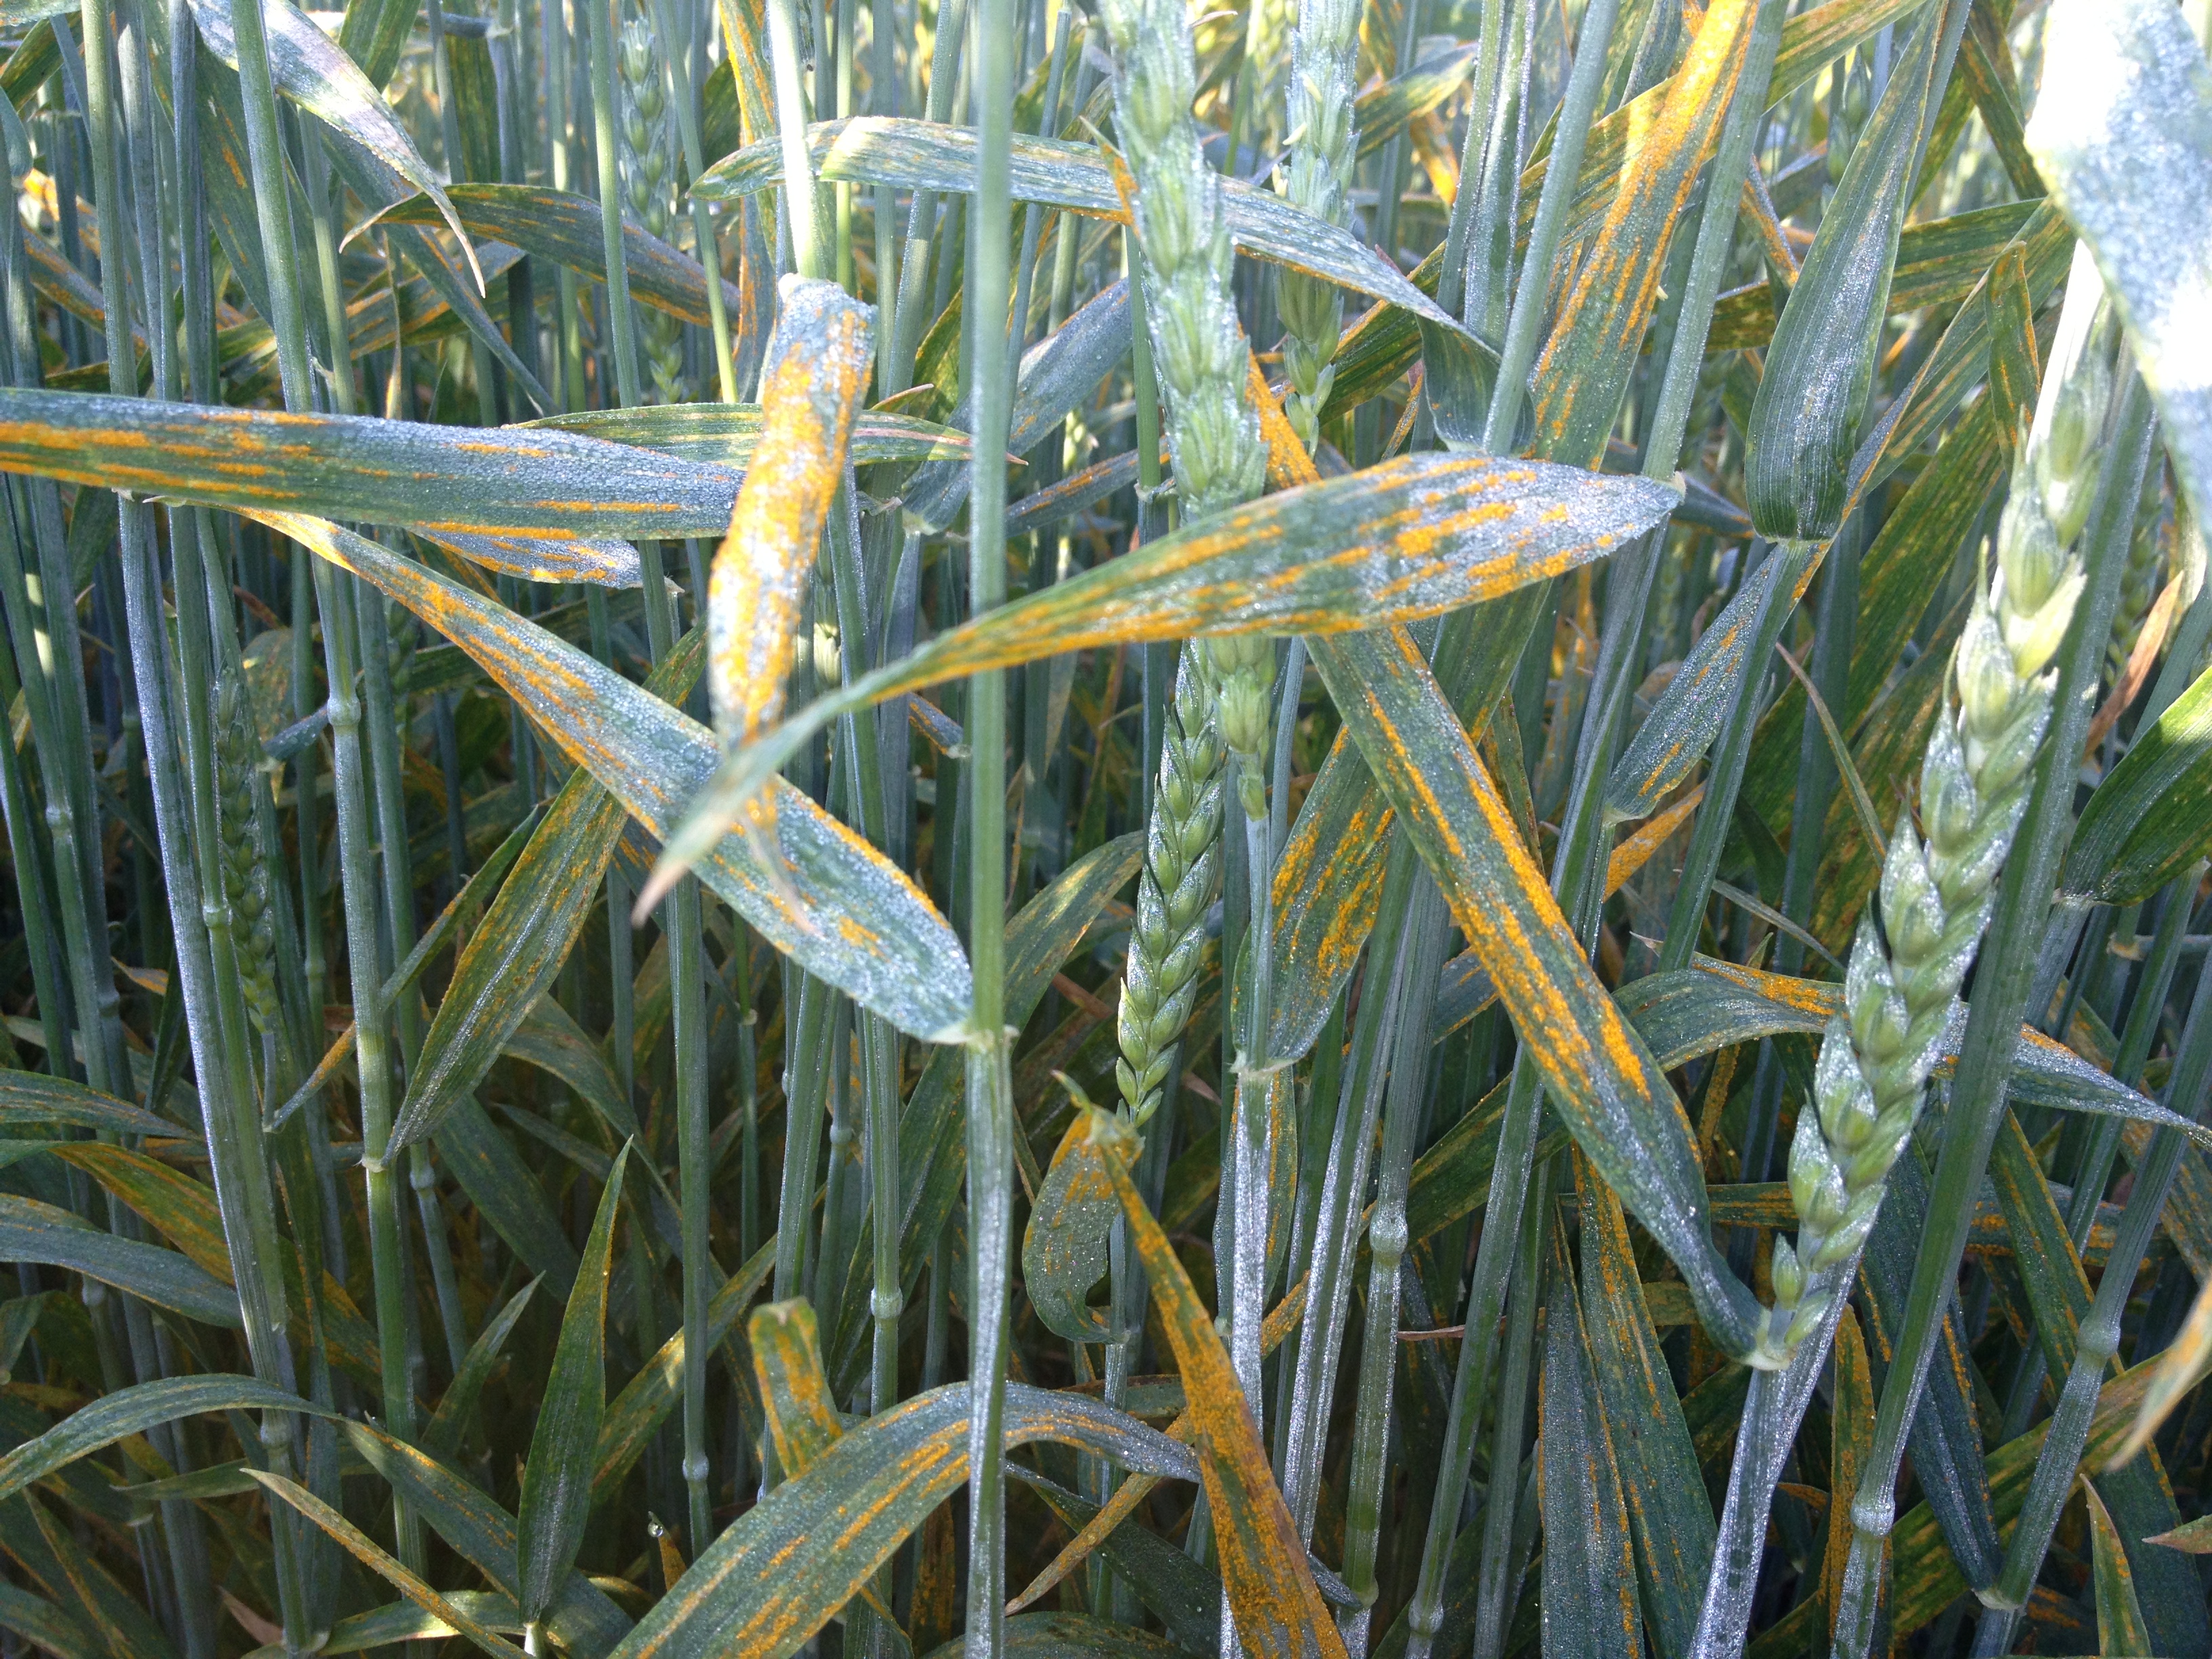 Stripe rust damage on wheat plants. Details in text following the image.